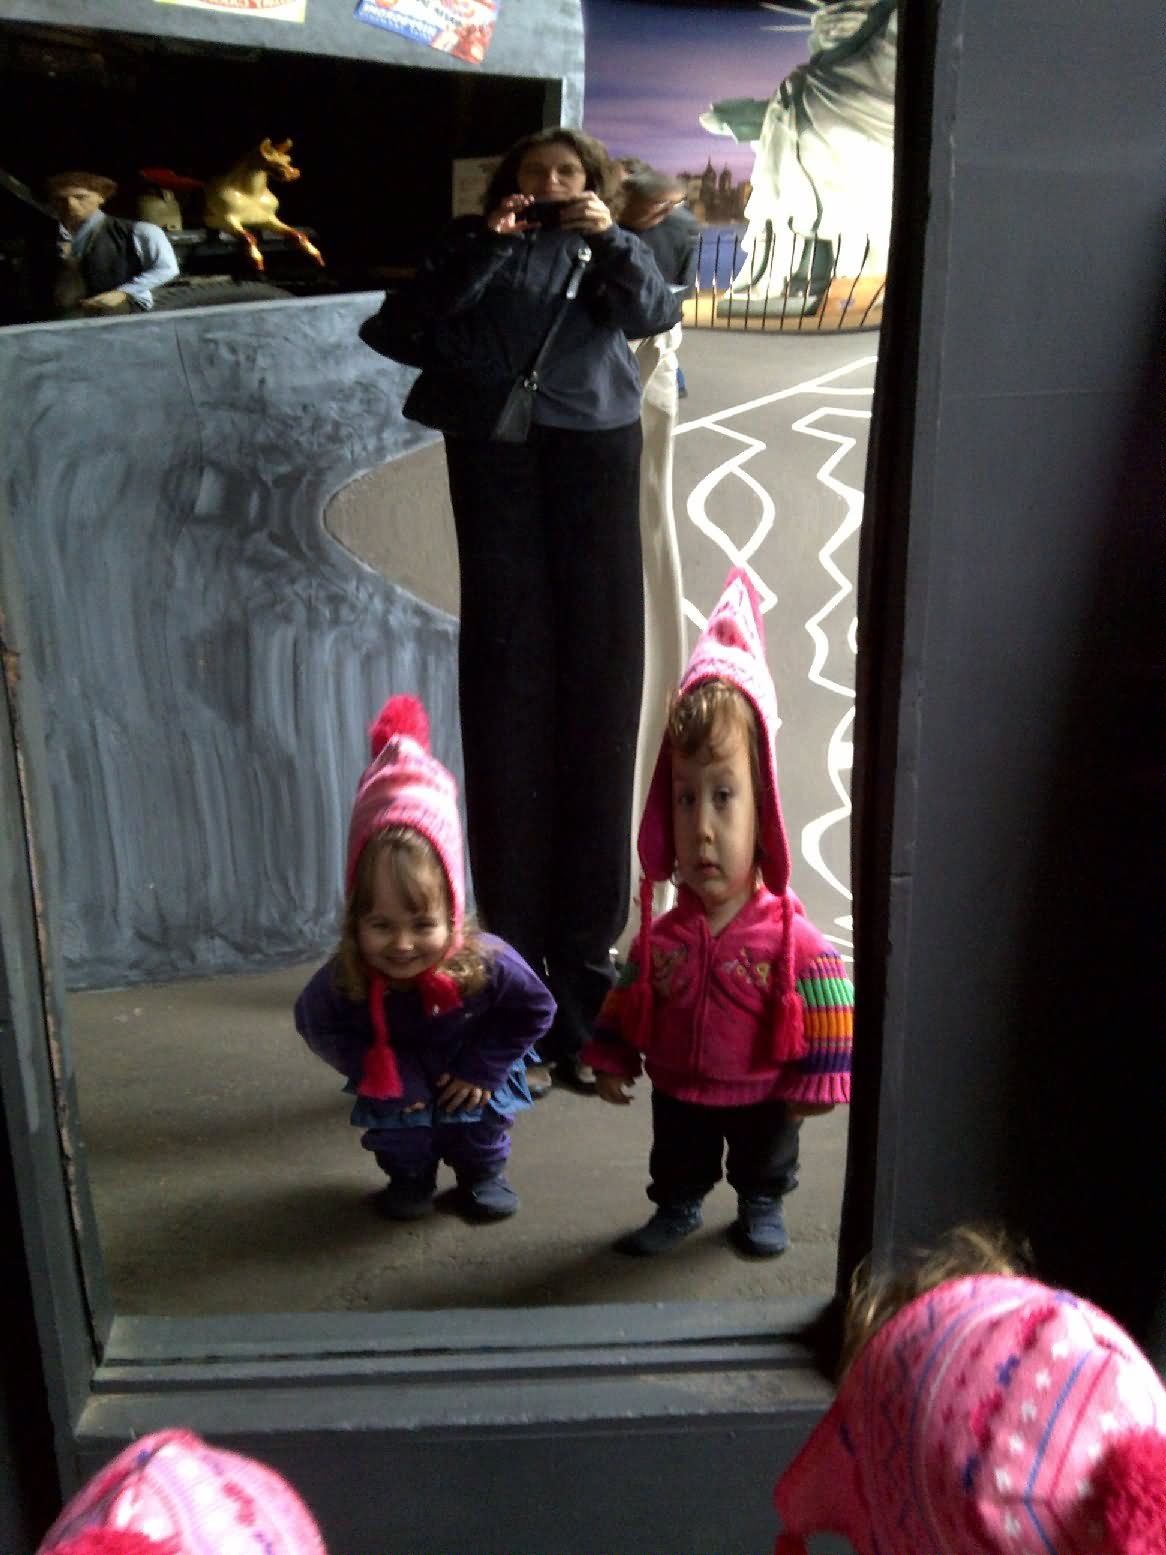 Kids Looking In Mirror Funny Image